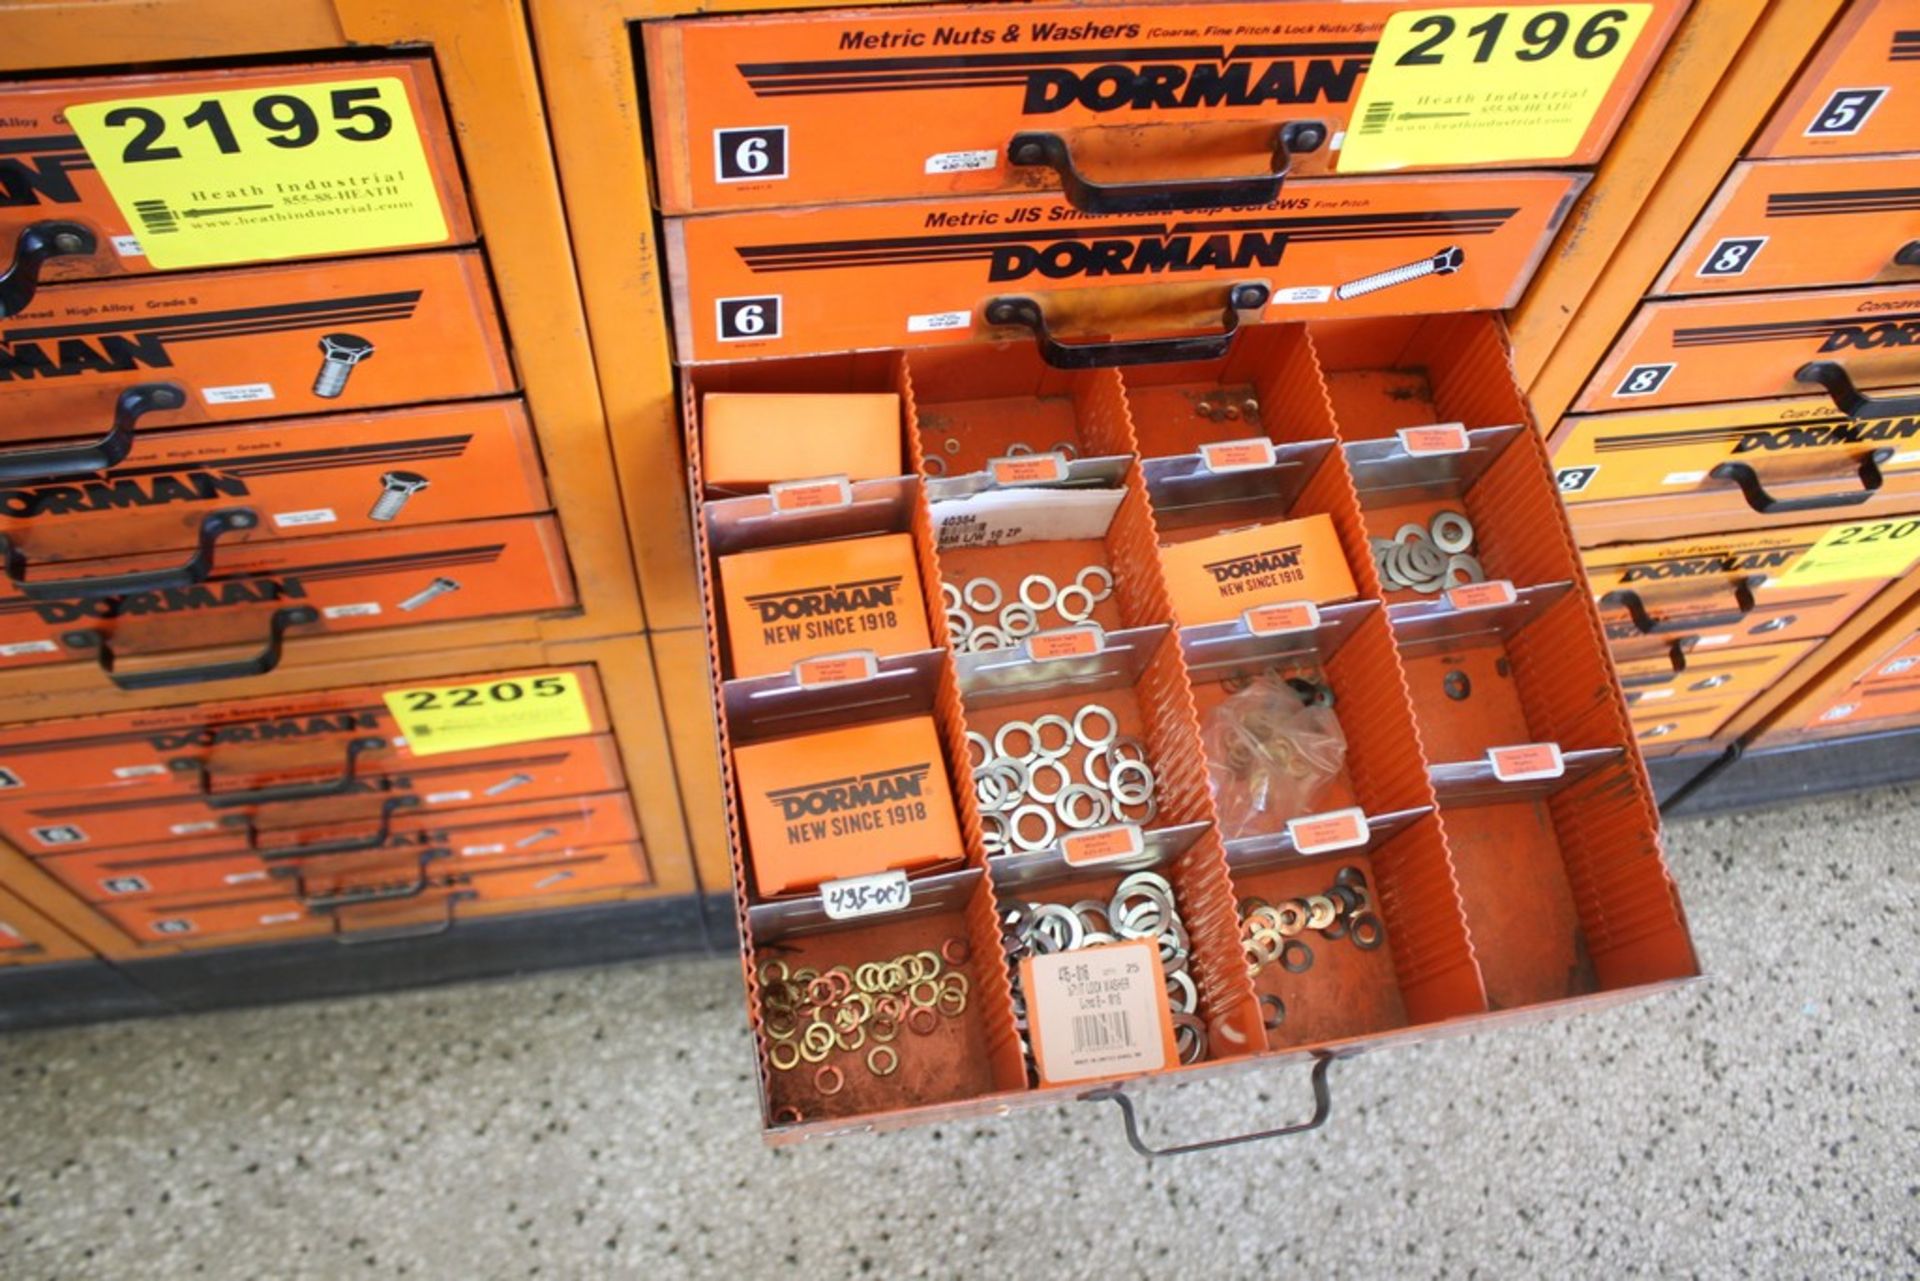 DORMAN FOUR DRAWER CABINET, CONTENTS INCLUDES METRIC NUTS, WASHERS AND CAP SCREWS - Image 4 of 5